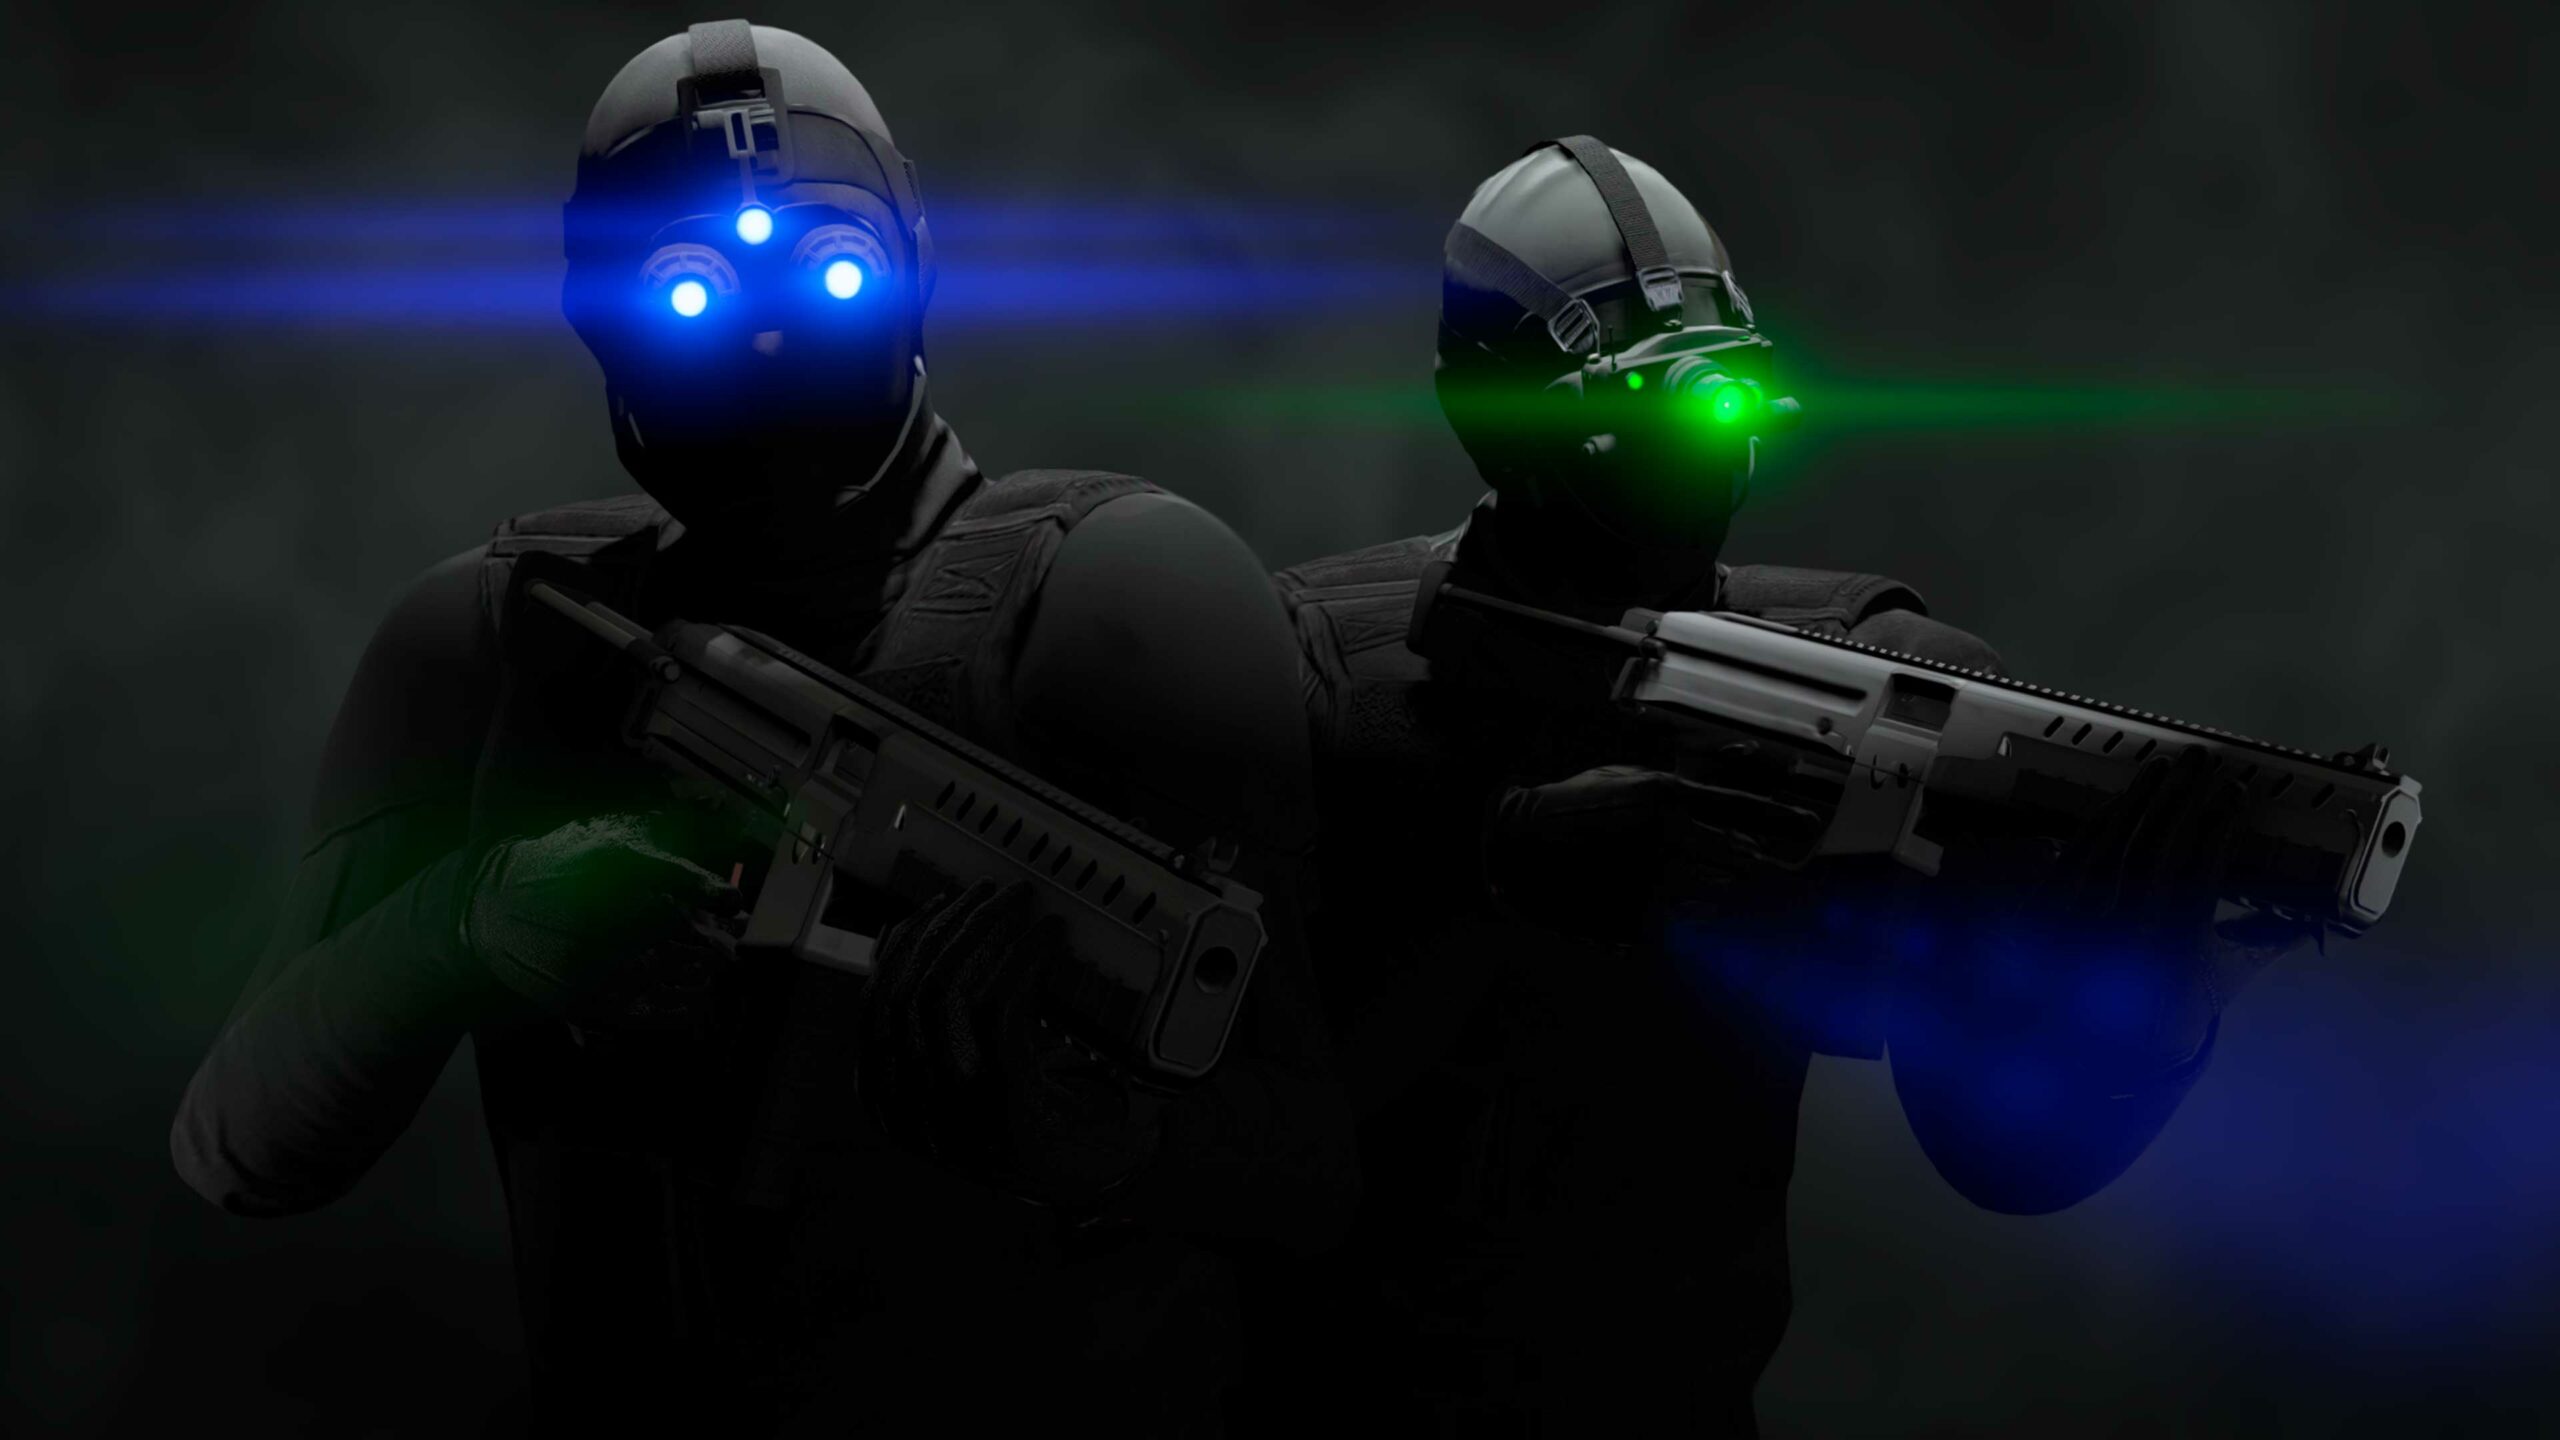 Night Vision Goggles or try on the Night Vision Masks